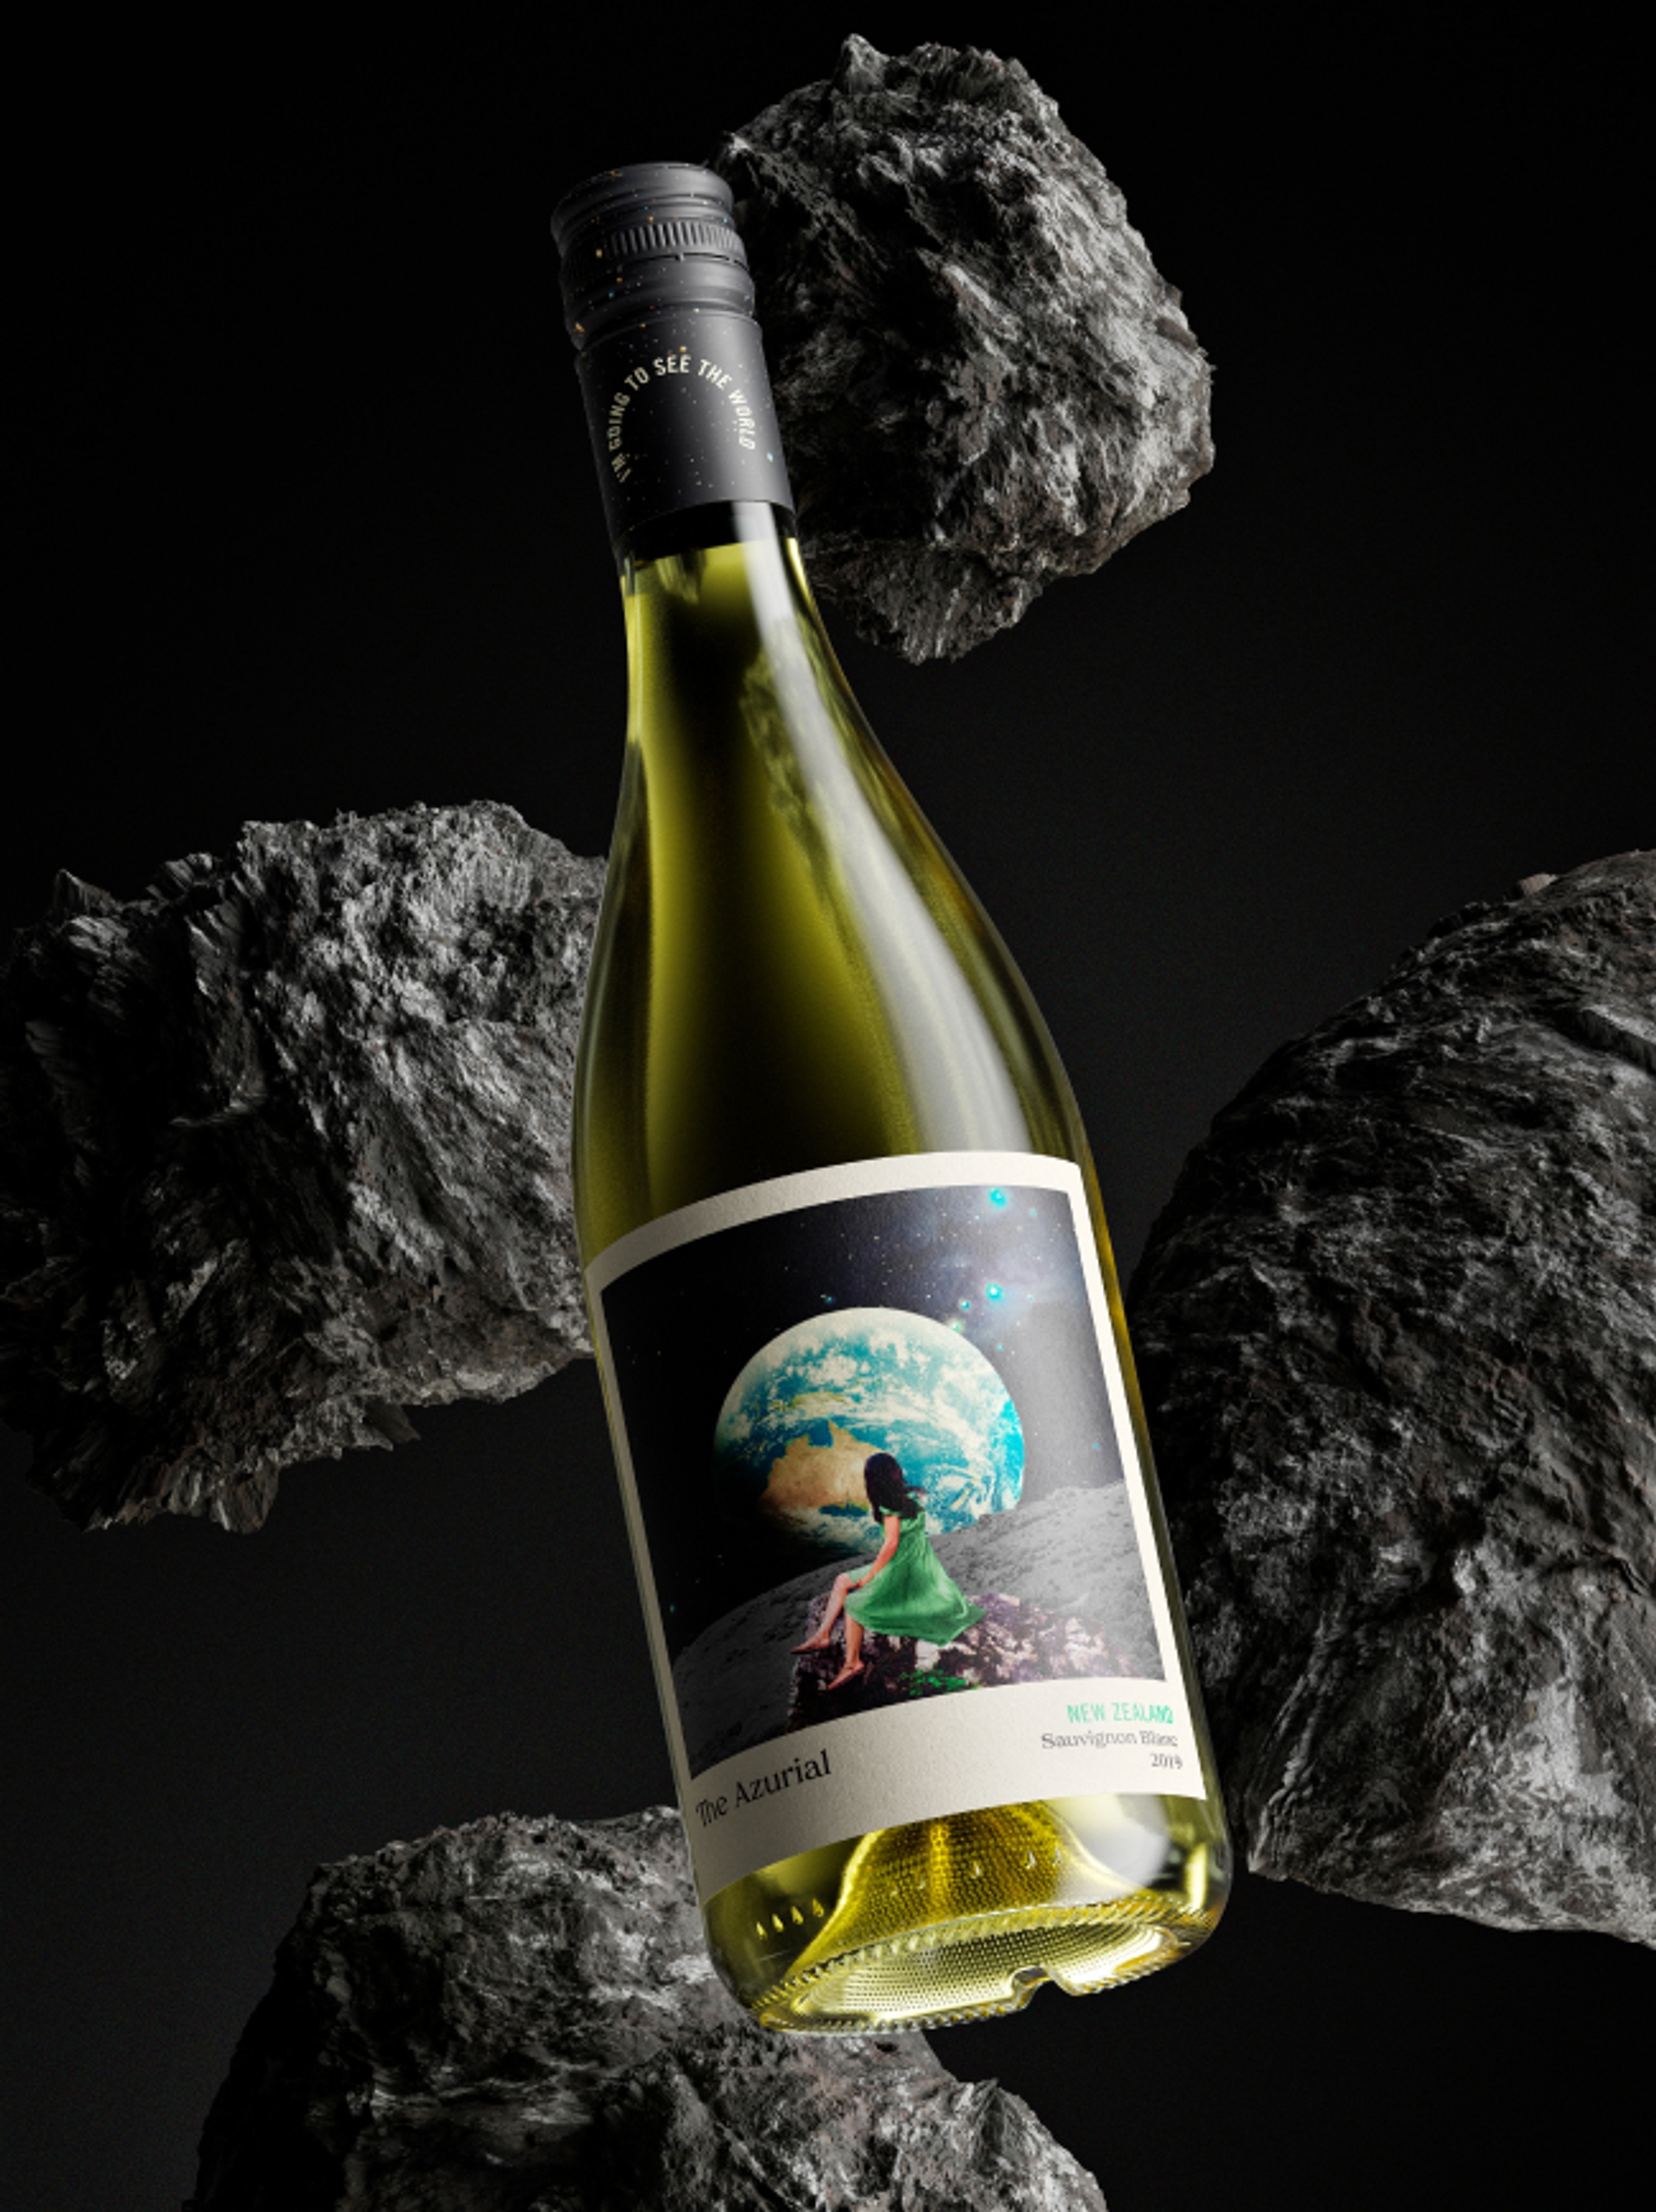 The Azurial wine label design by Our Revolution floating in space surrounded by large textured rocks